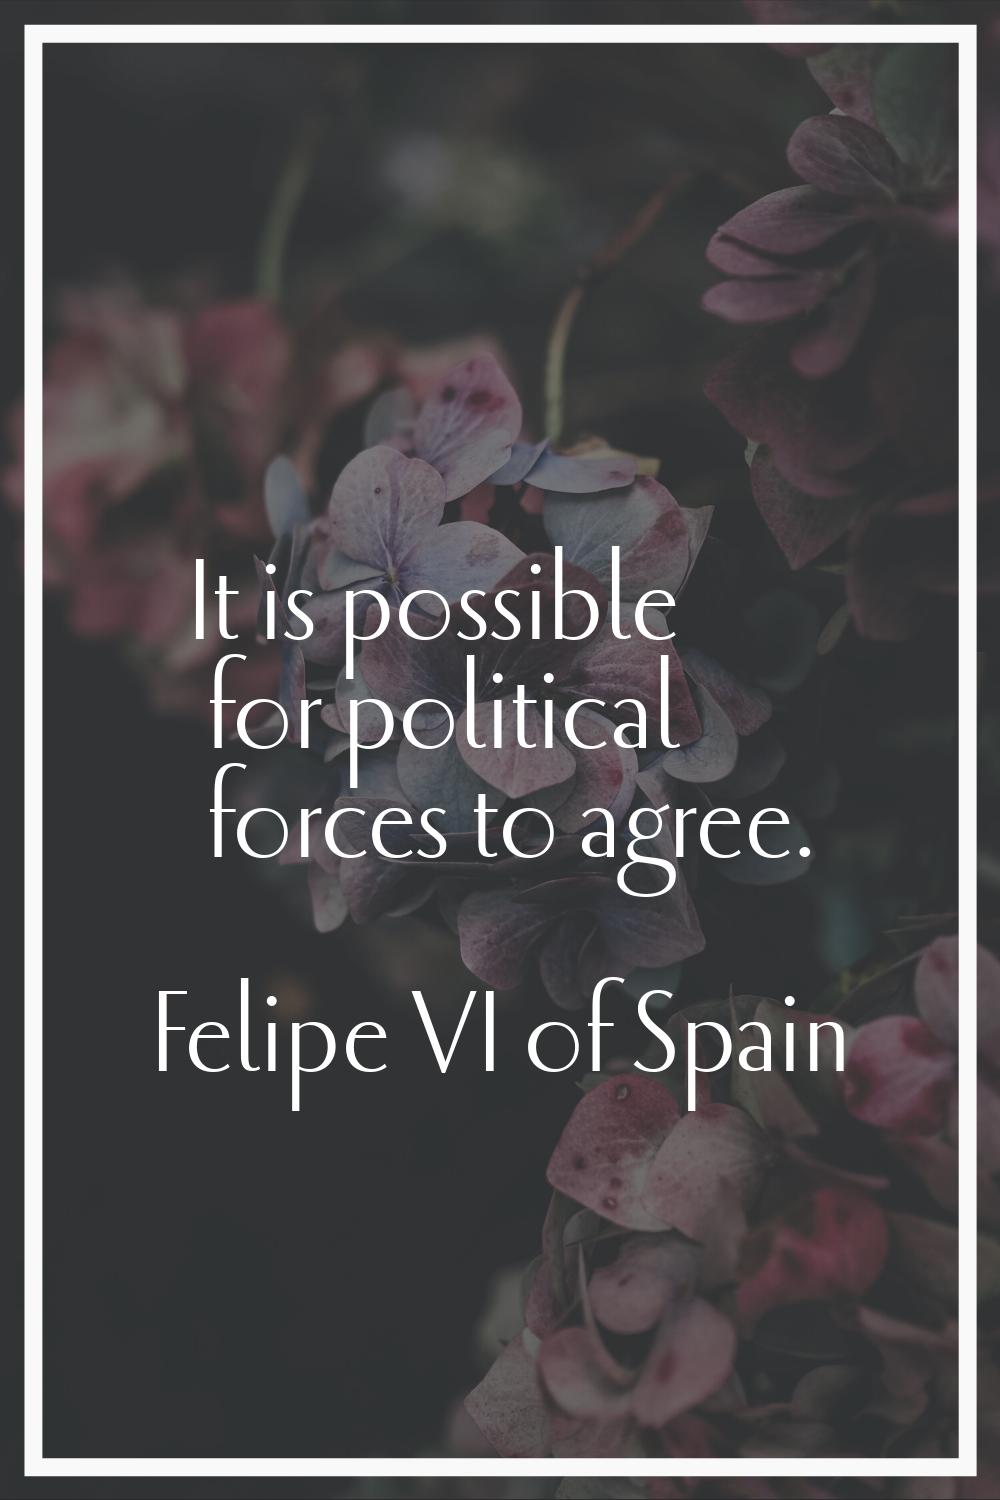 It is possible for political forces to agree.